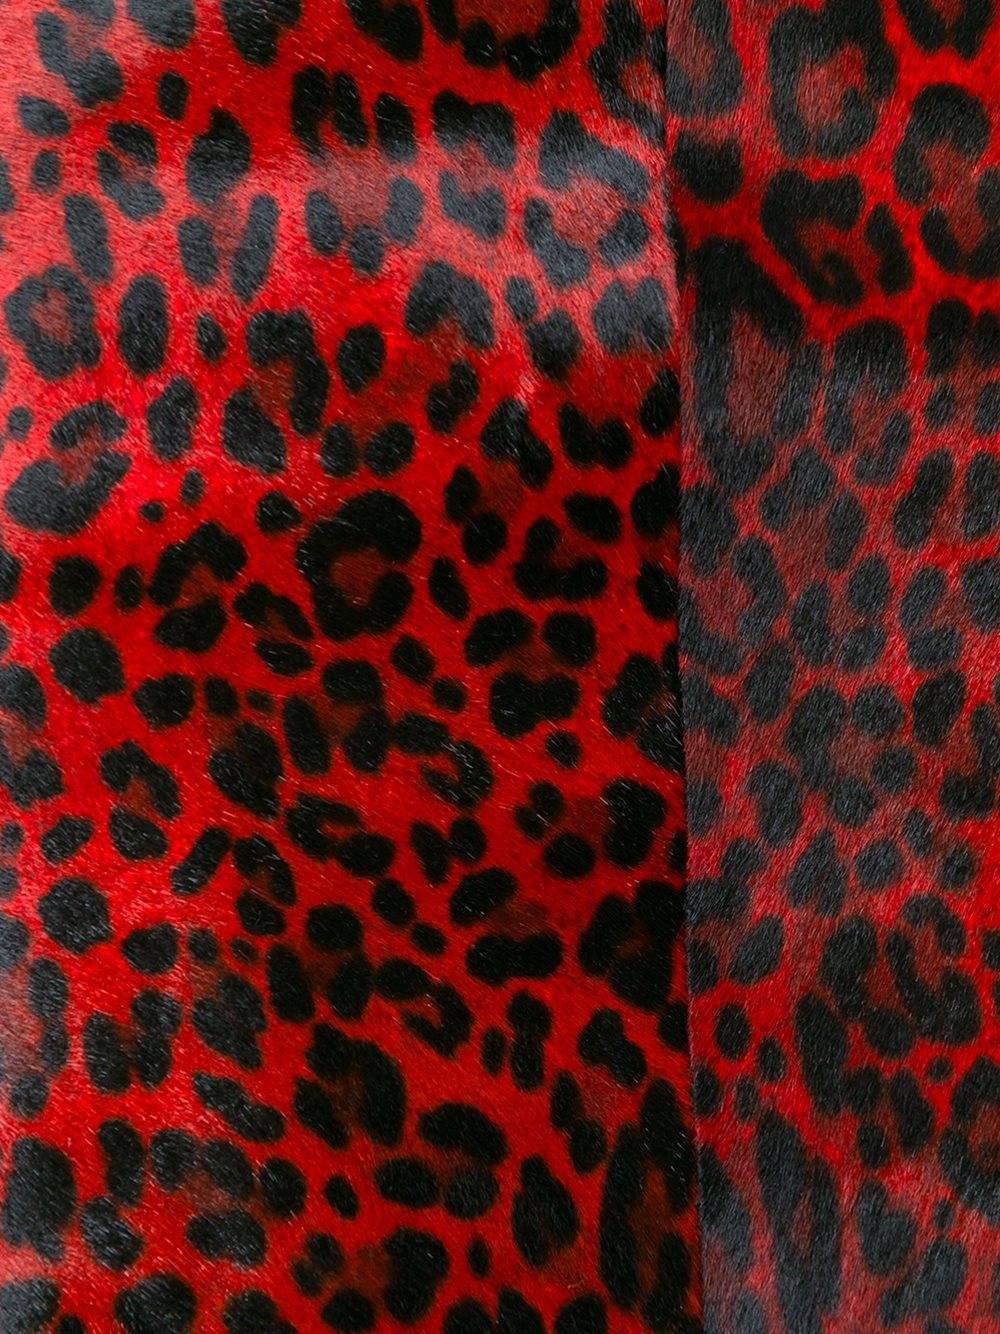 Alaïa red calf hair and nylon leopard print pencil skirt.

Colour: Red

Material: Nylon 100%  / Calf Hair 100%

Size: FR 38

Measurements: waist: 62 centimetres, hips: 86 centimetres, length: 50 centimetres

Condition: 9.5 out of 10